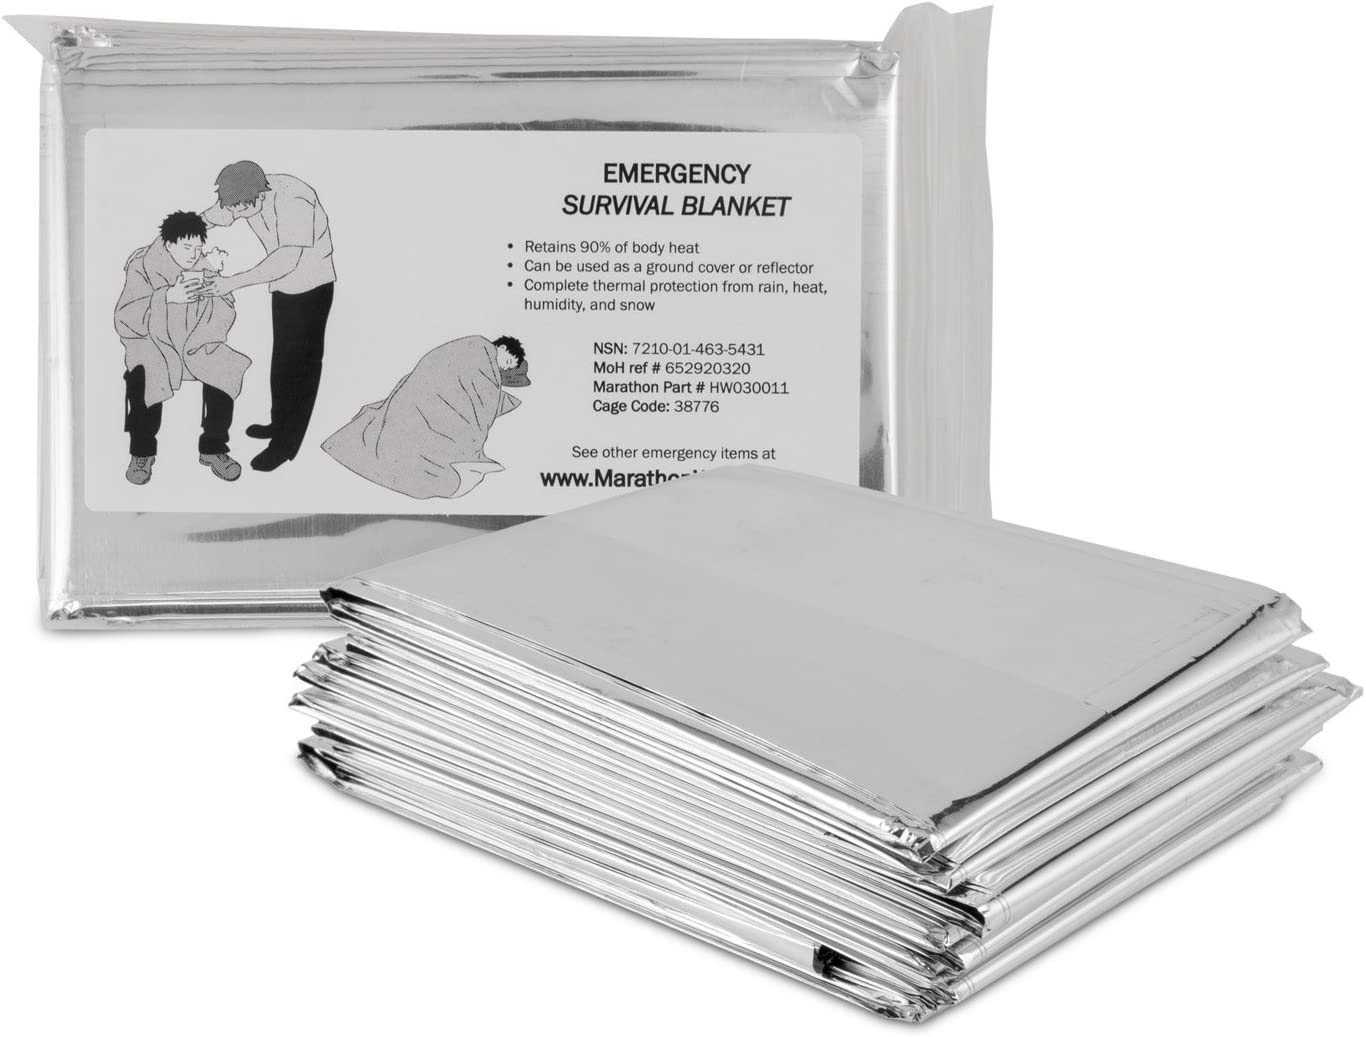 Emergency Mylar Thermal Blankets | Emergency Kit Roadside First Aid Kit Travel | Hiking Gear Camping Outdoor Sleeping Insulated – Silver by Marathon Housewares